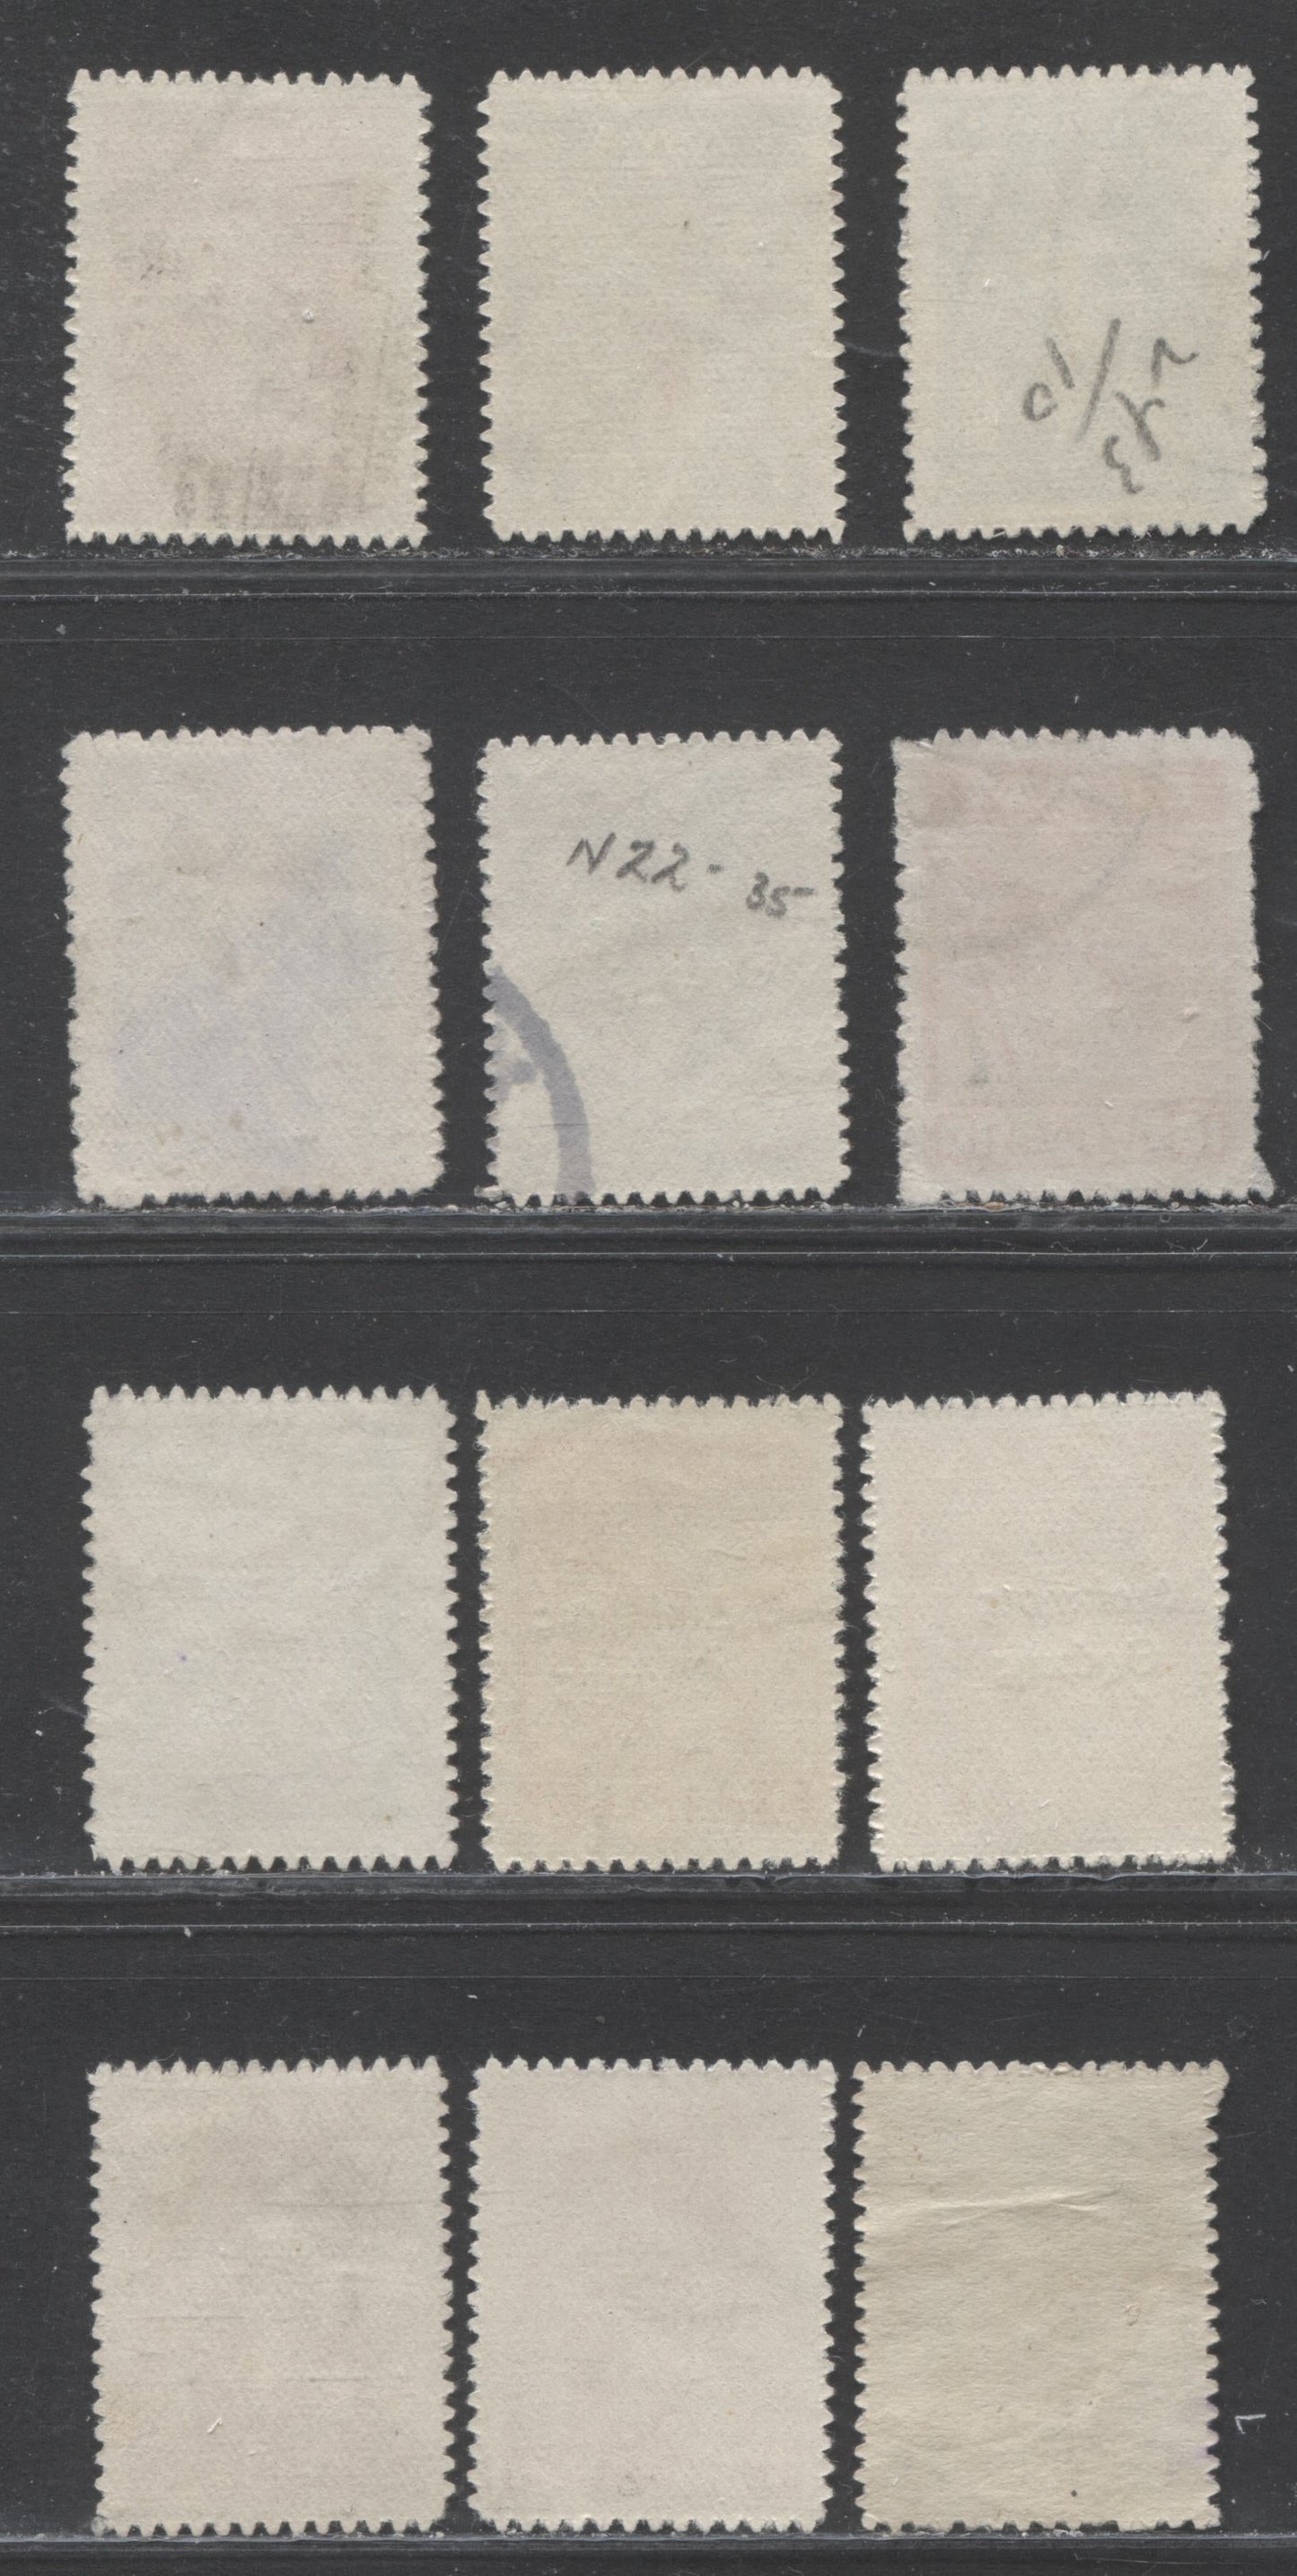 Lot 309 Thrace - Greek Occupation SC#N55/N69 1920 Occupation Stamps With 4 Line Black Overprint, A F/VF Used Range Of Singles, 2022 Scott Classic Cat.$17.25 USD, Click on Listing to See ALL Pictures